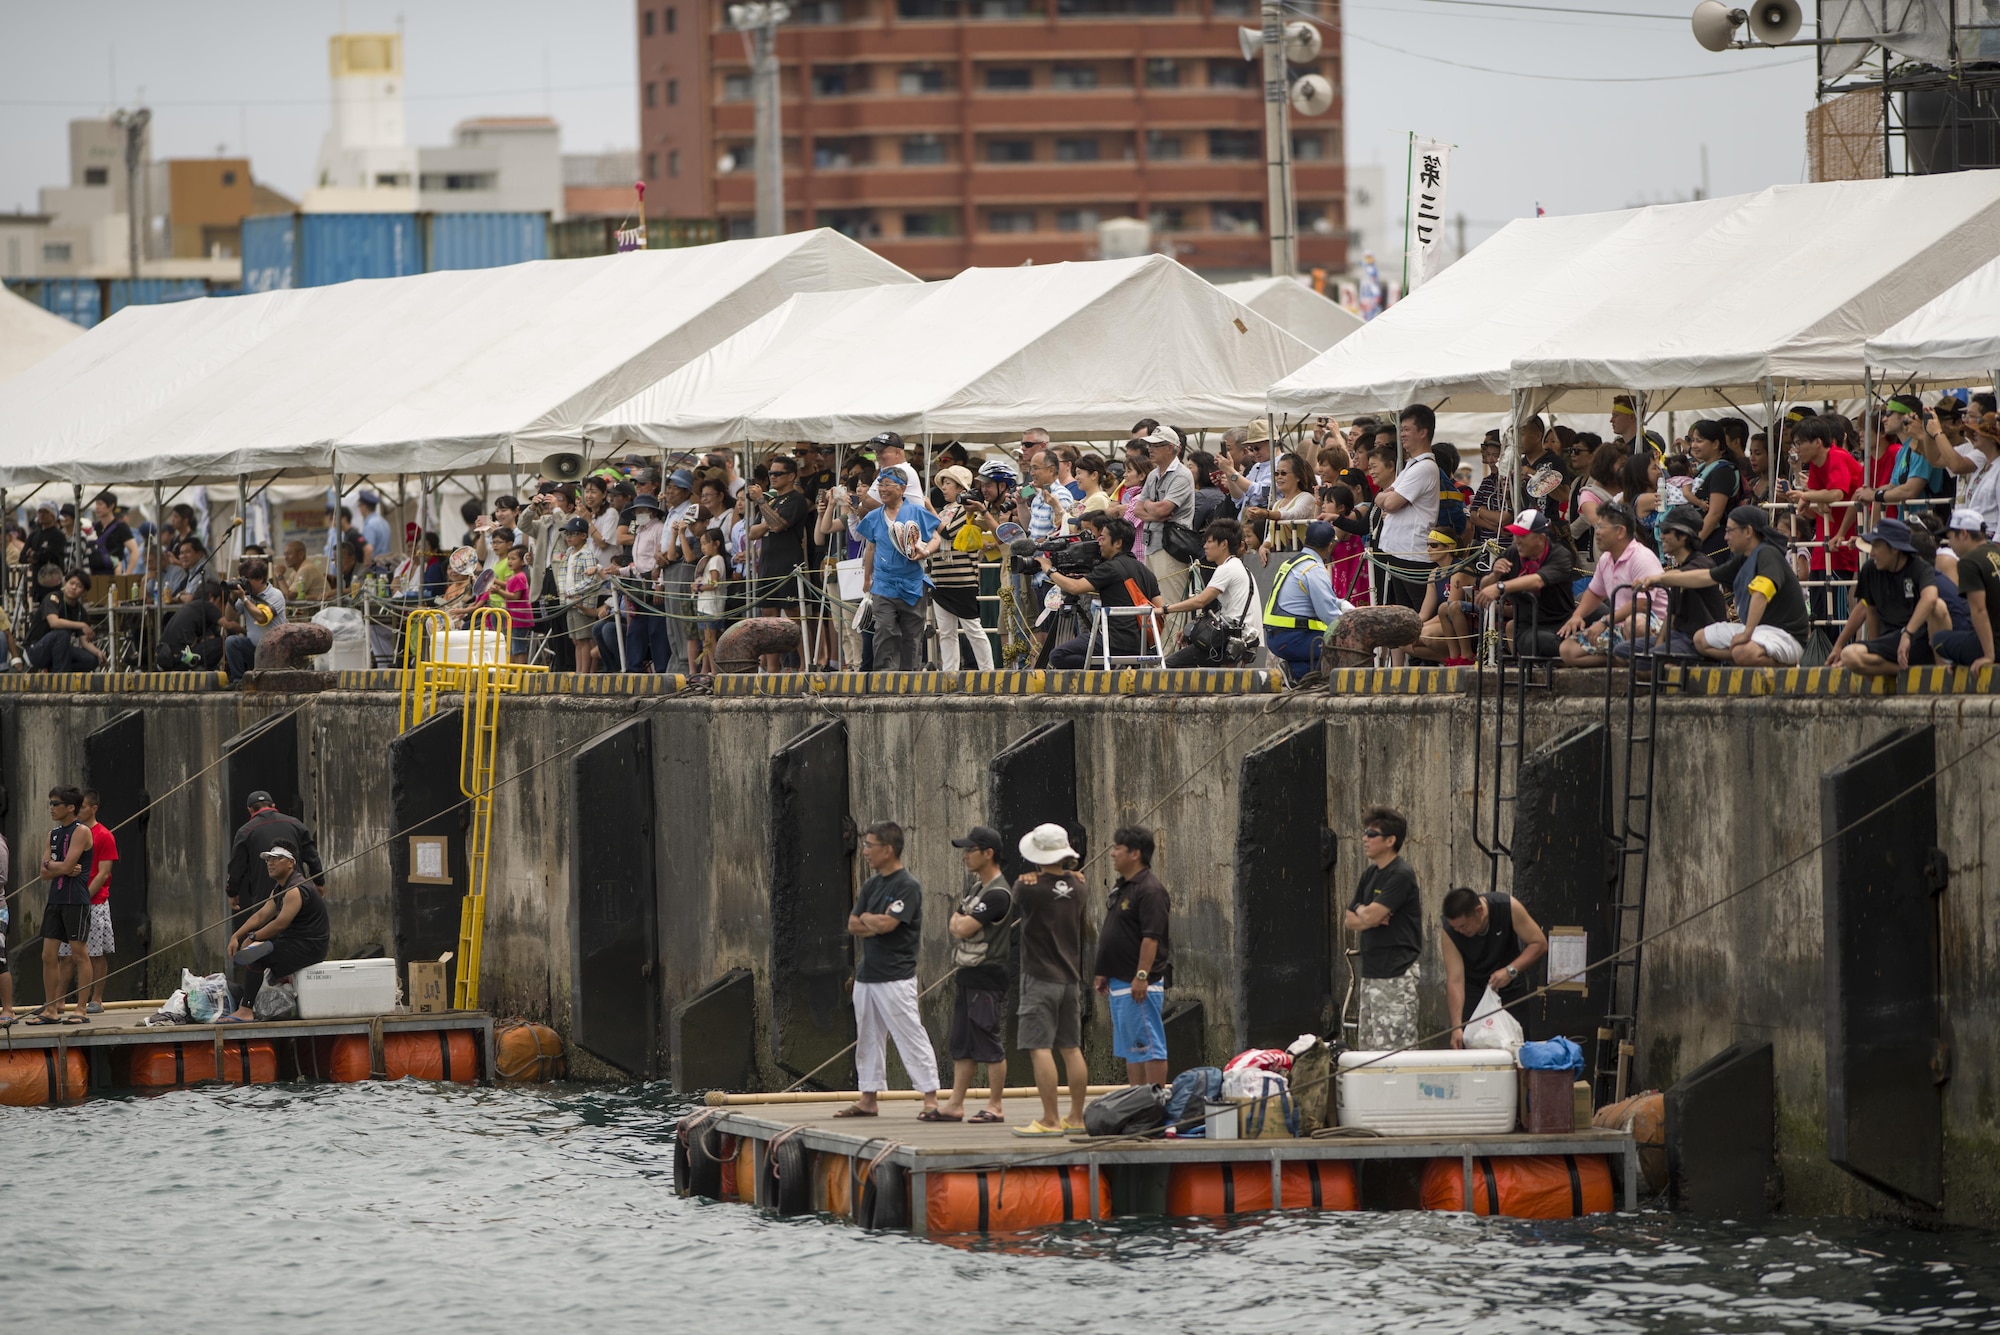 Thousands of spectators watch teams compete during the 43rd Annual Naha Dragon Boat Race May 5, 2017, at Naha Port, Japan. The Naha Dragon Boat Race is the largest dragon boat race on Okinawa with more than 50 competing teams. (U.S. Air Force photo by Senior Airman Omari Bernard)